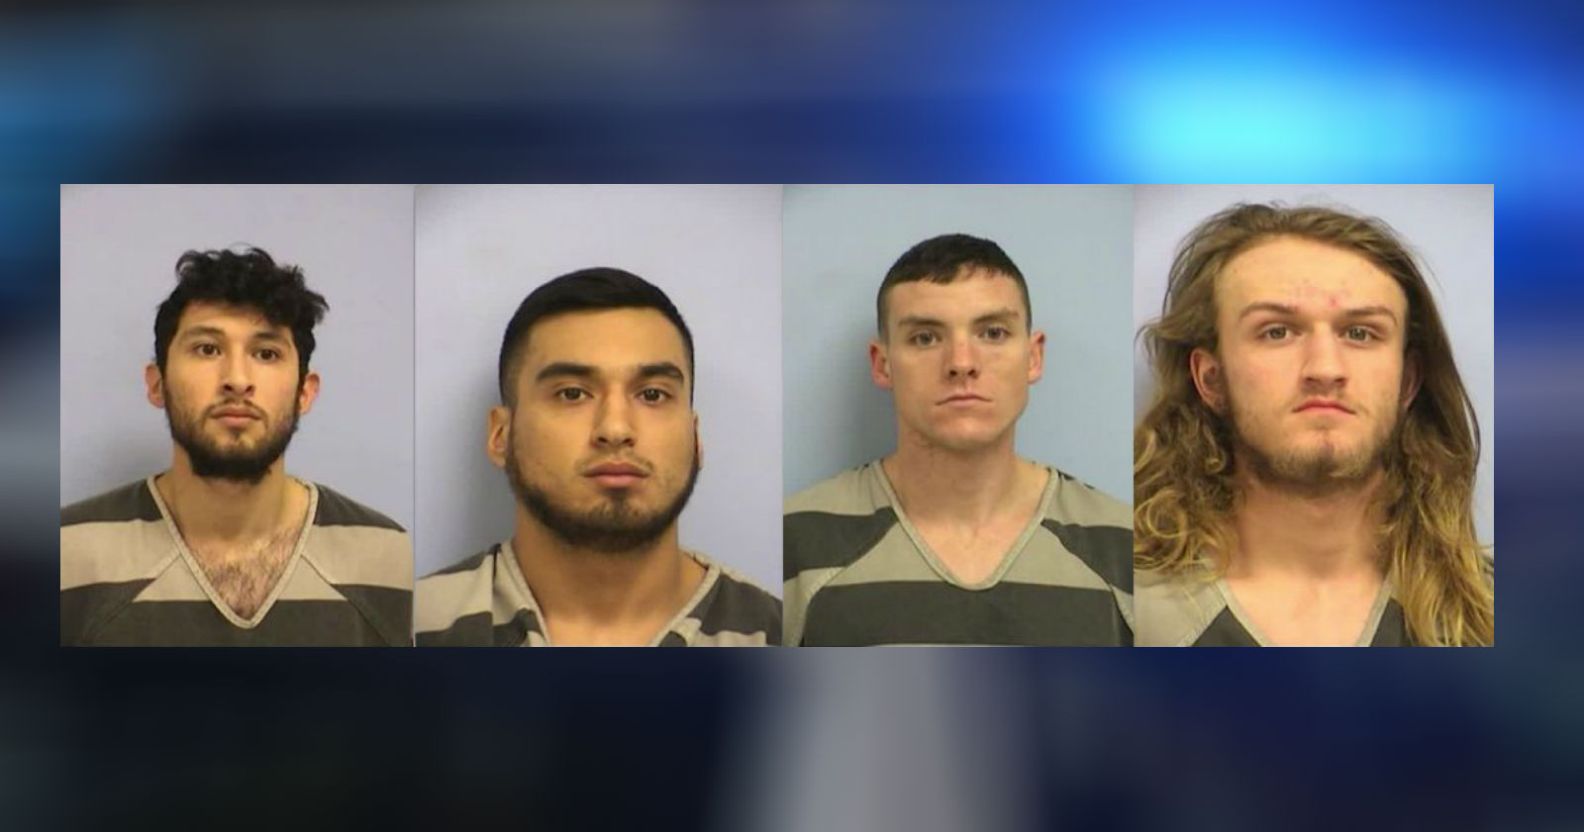 Frank Macias, 22, Miguel Macias, 20, Quinn O'Connor, 19, and Kolby Monell, 21 were arrested over the attack